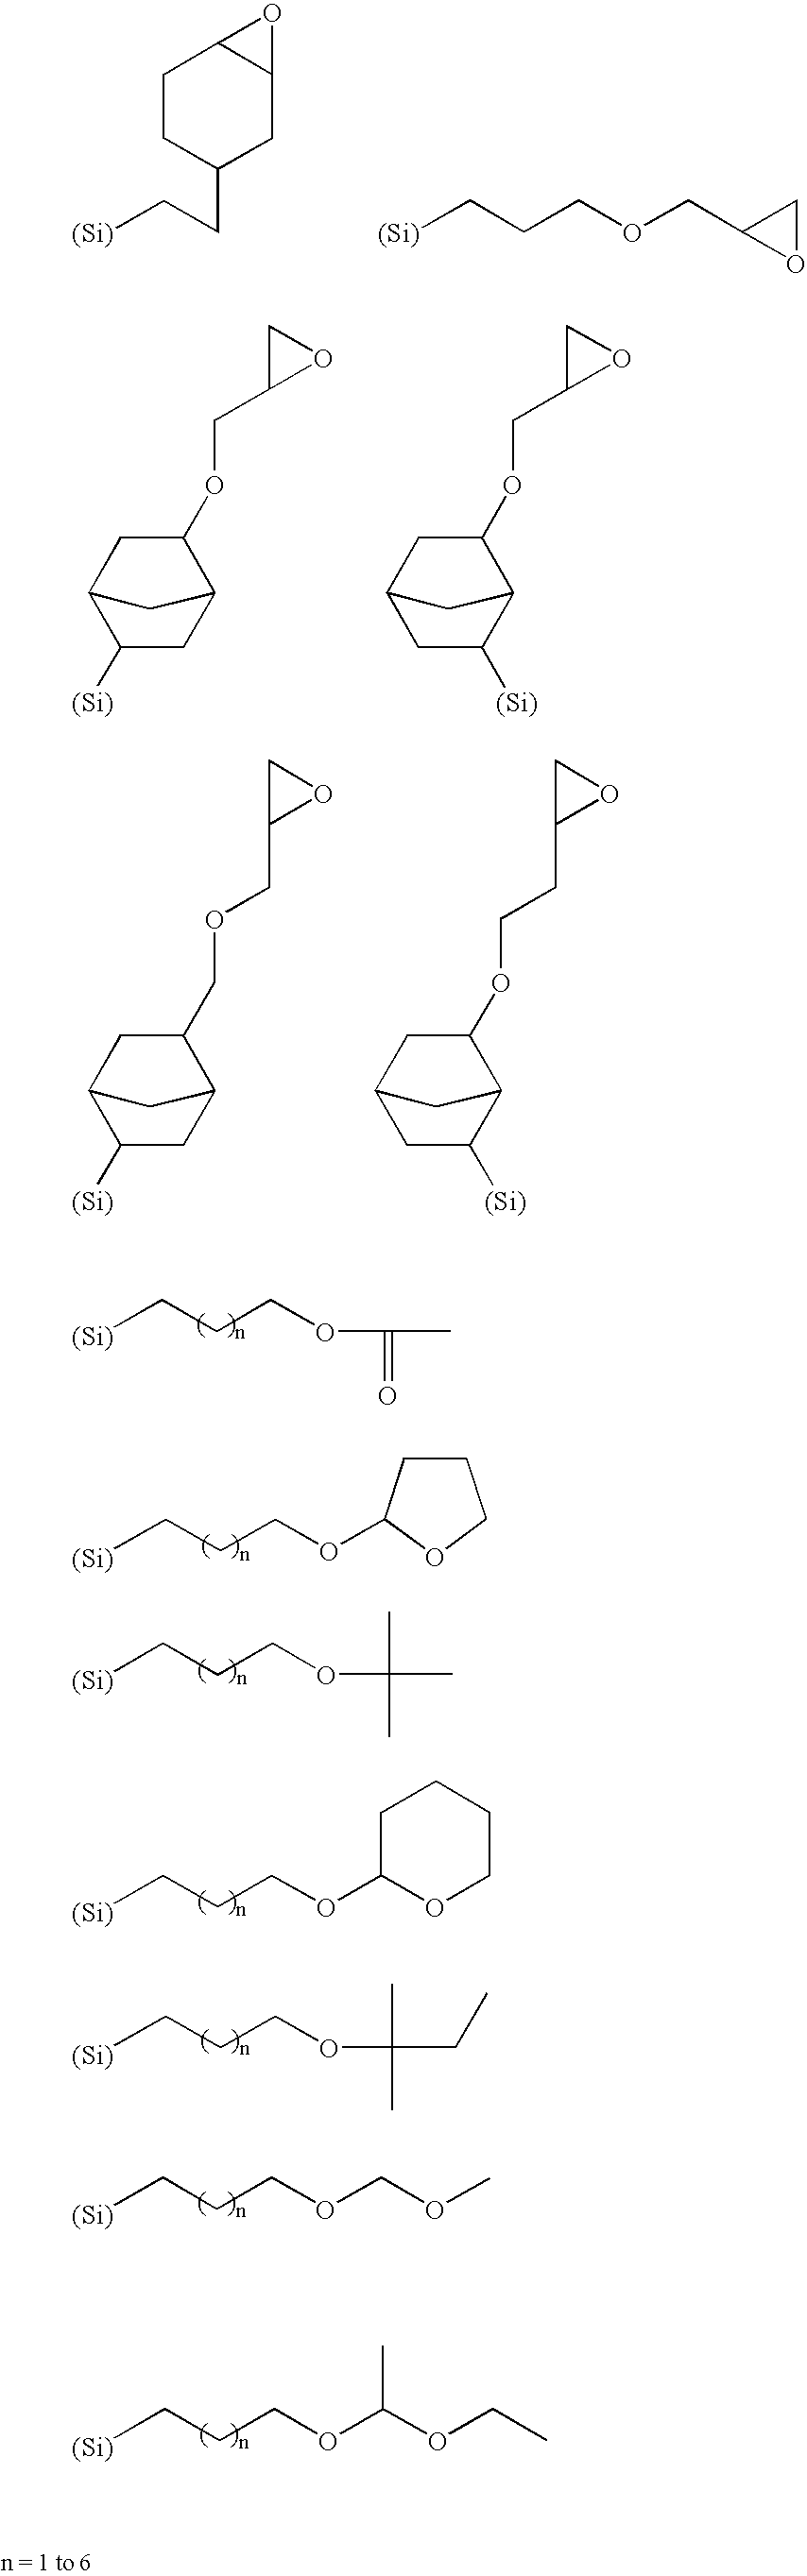 Silicon-containing film forming composition, silicon-containing film serving as etching mask, substrate processing intermediate, and substrate processing method